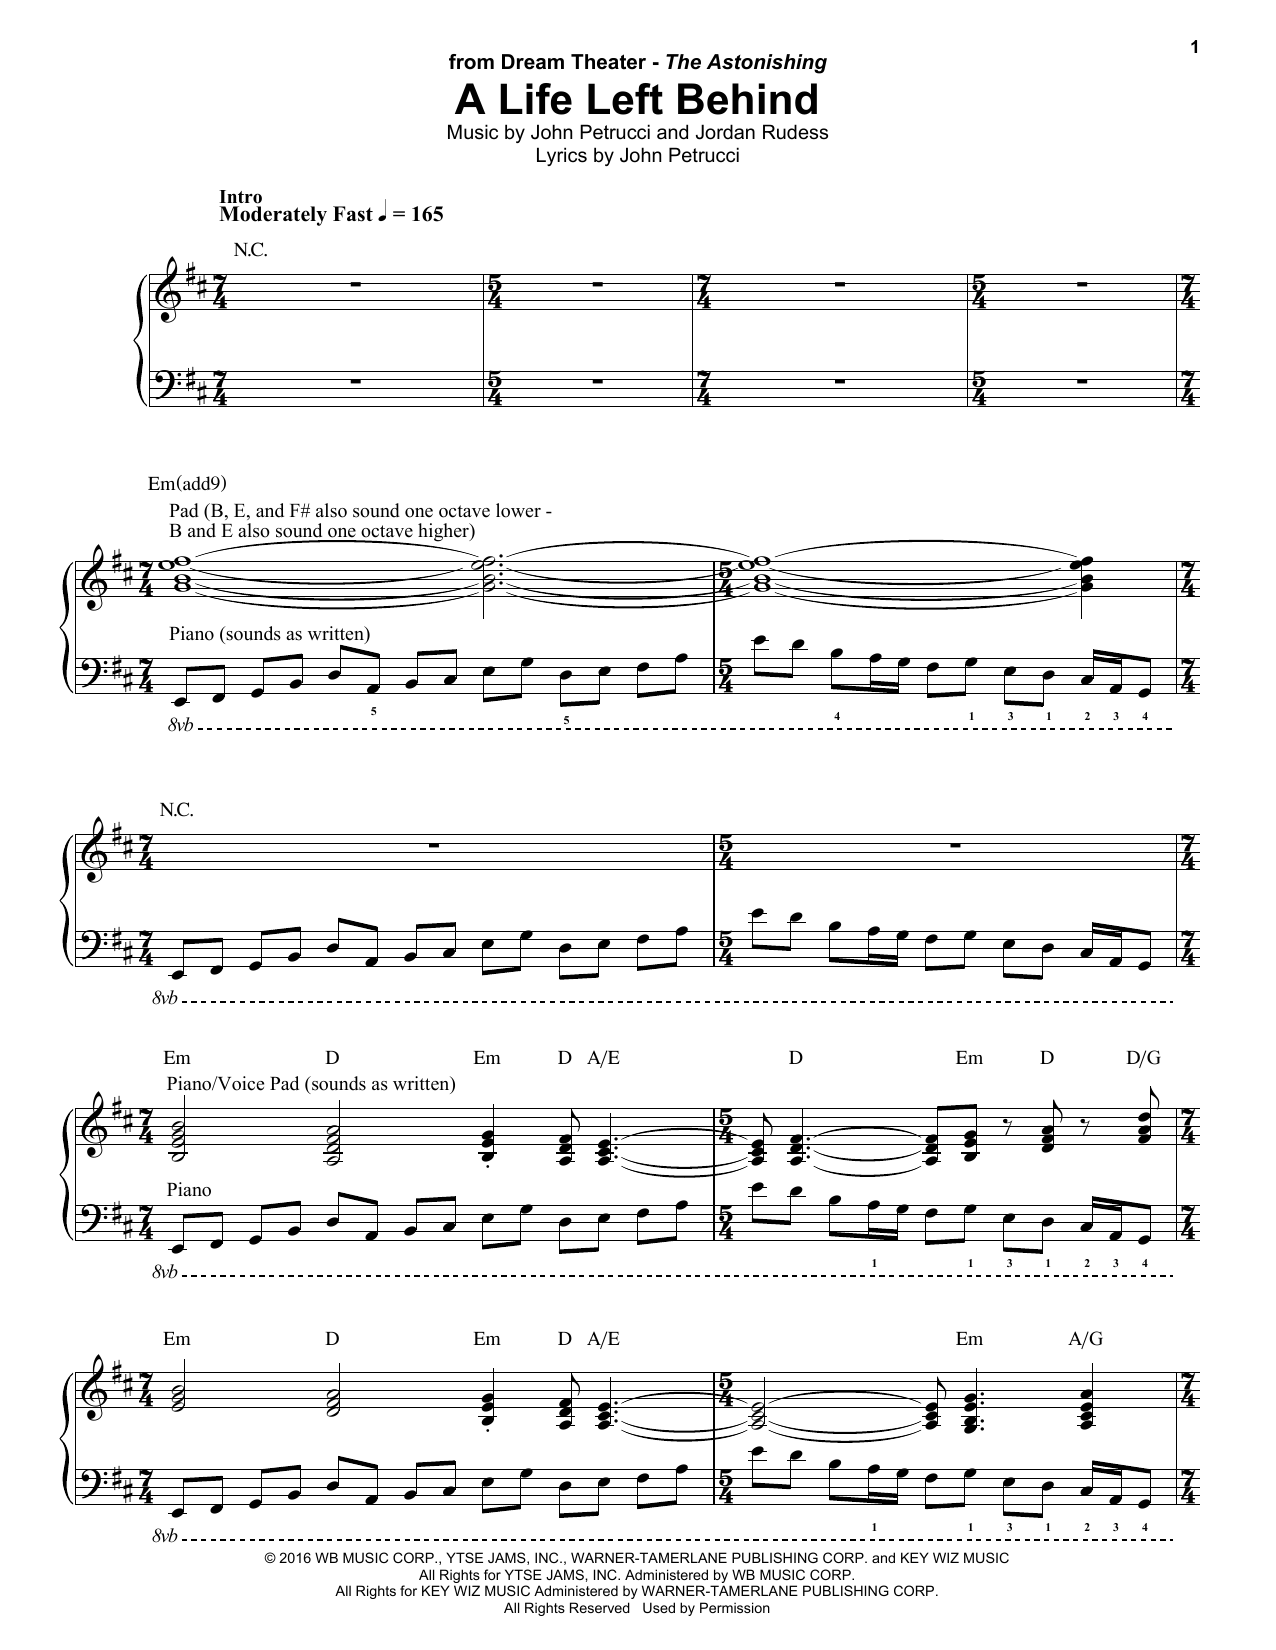 Dream Theater A Life Left Behind sheet music notes and chords. Download Printable PDF.